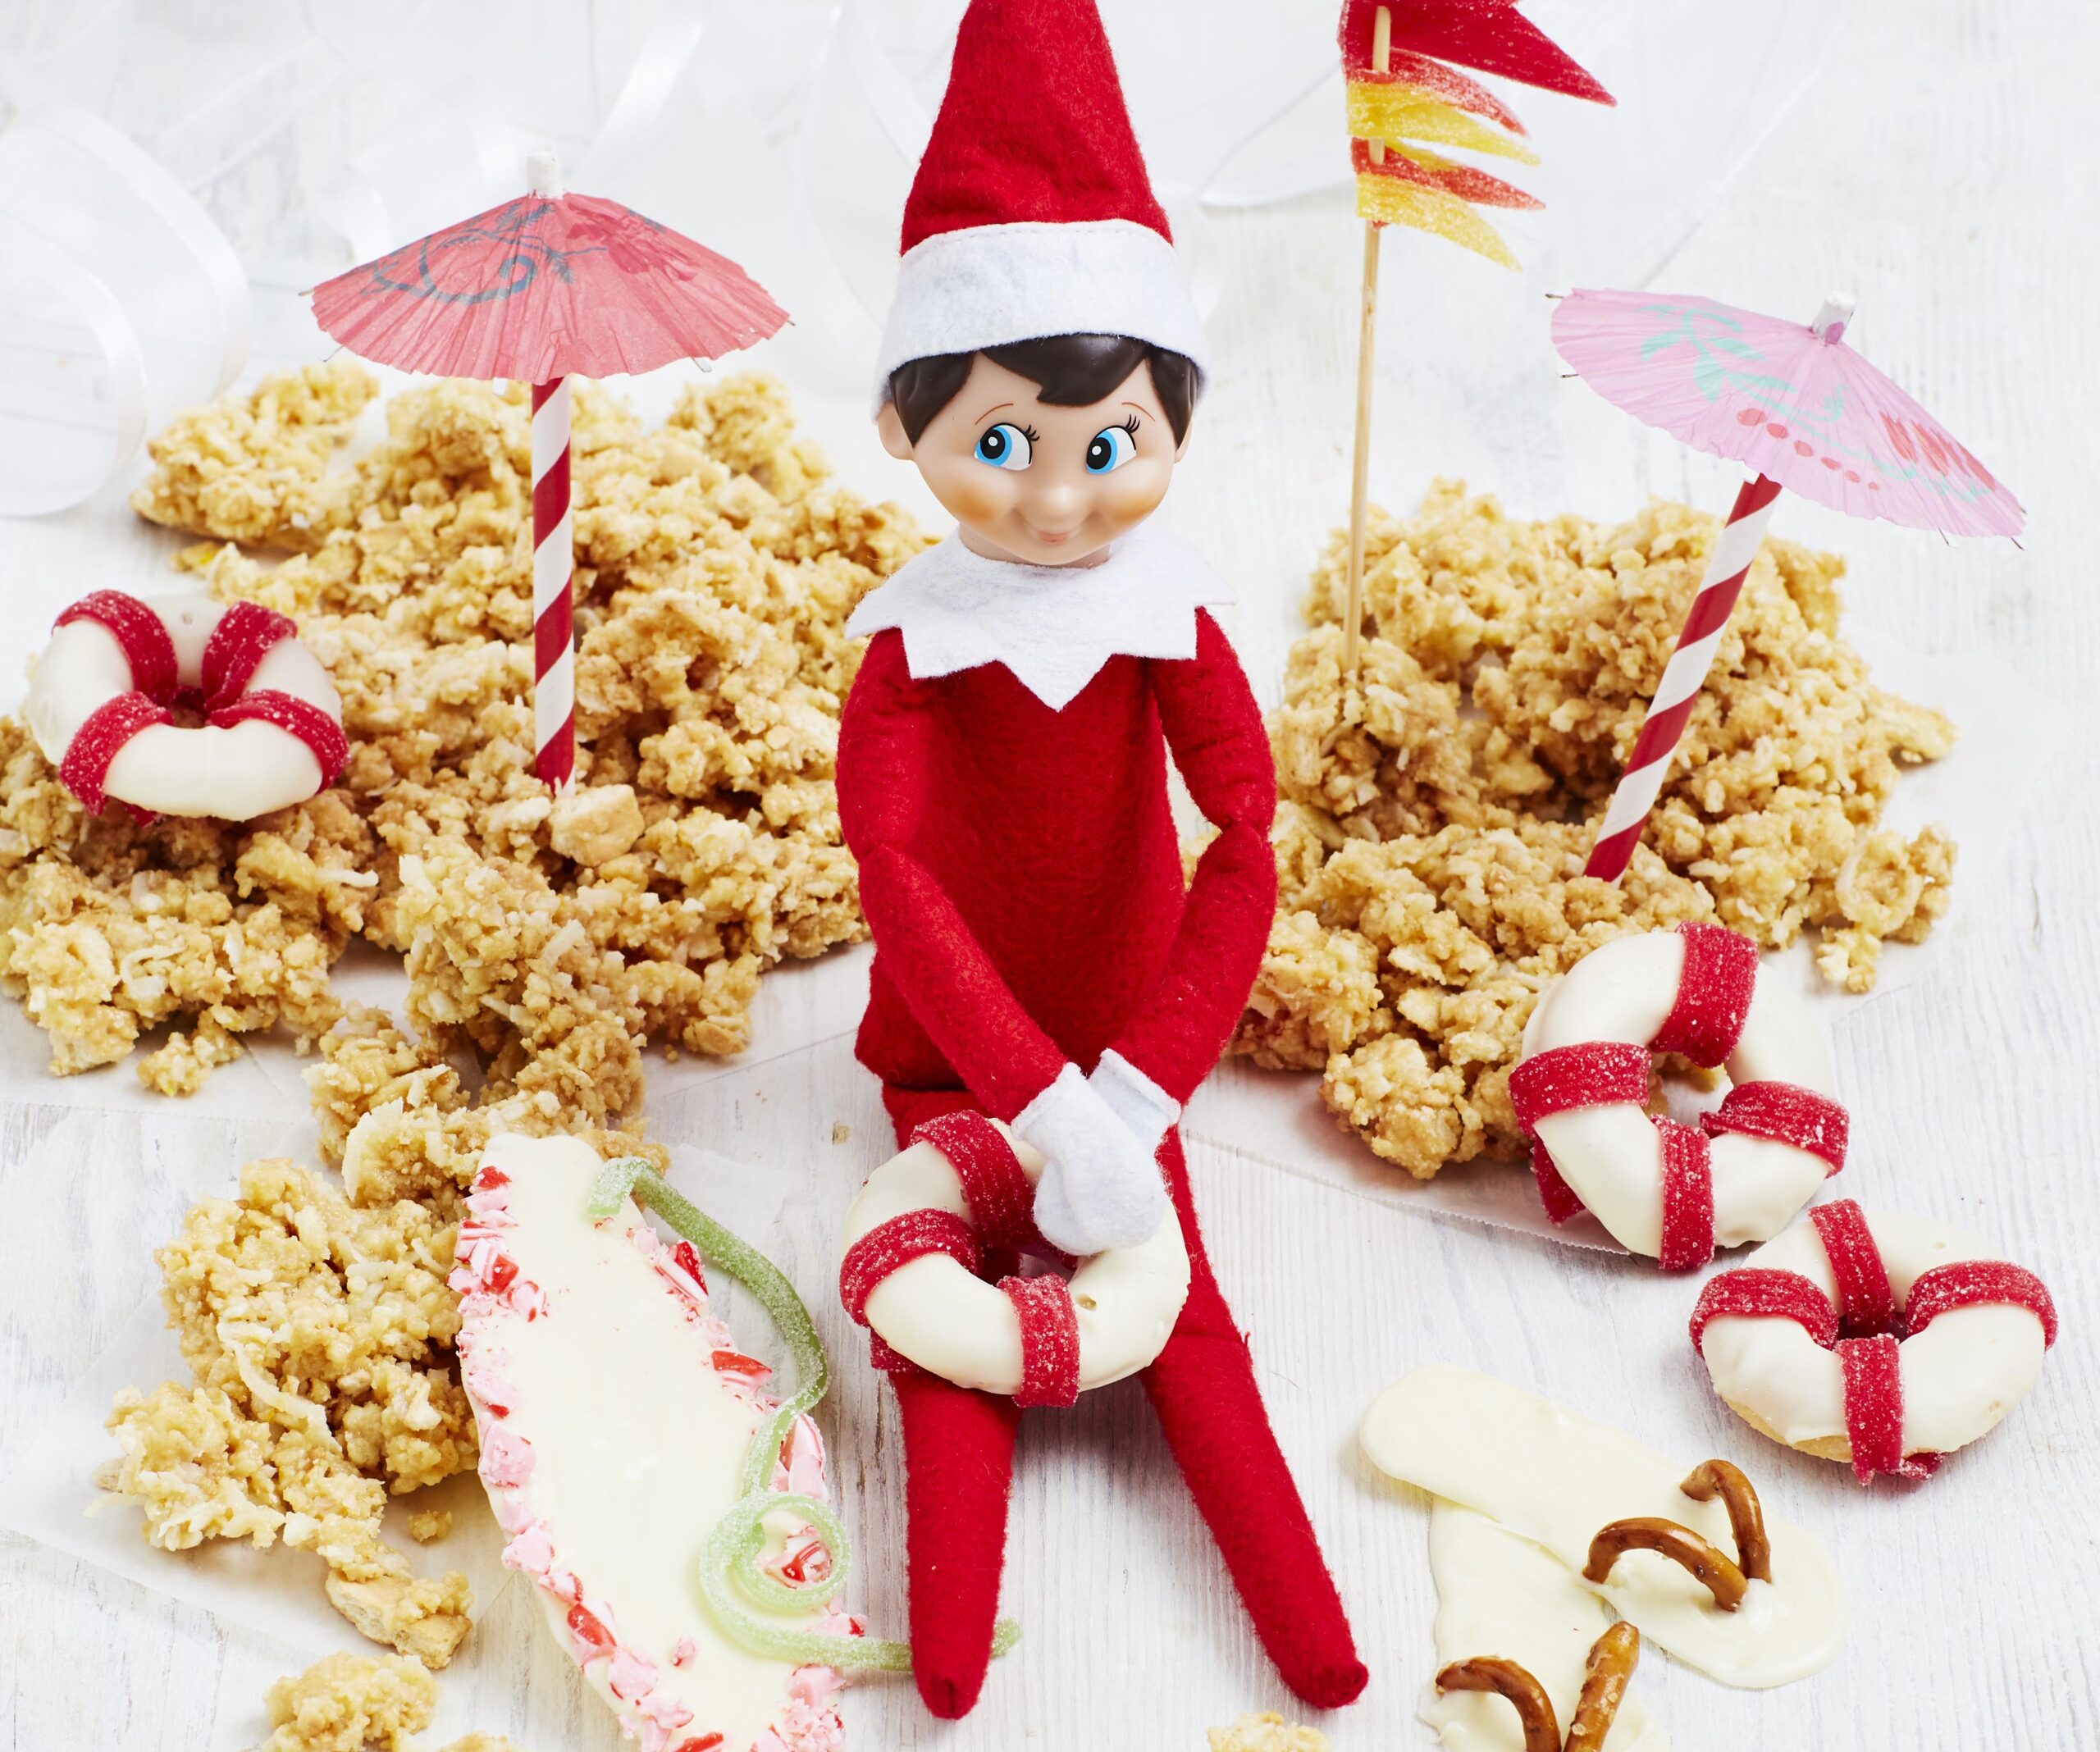 A very Elfy Christmas! We’ve given Elf on the Shelf an edible makeover